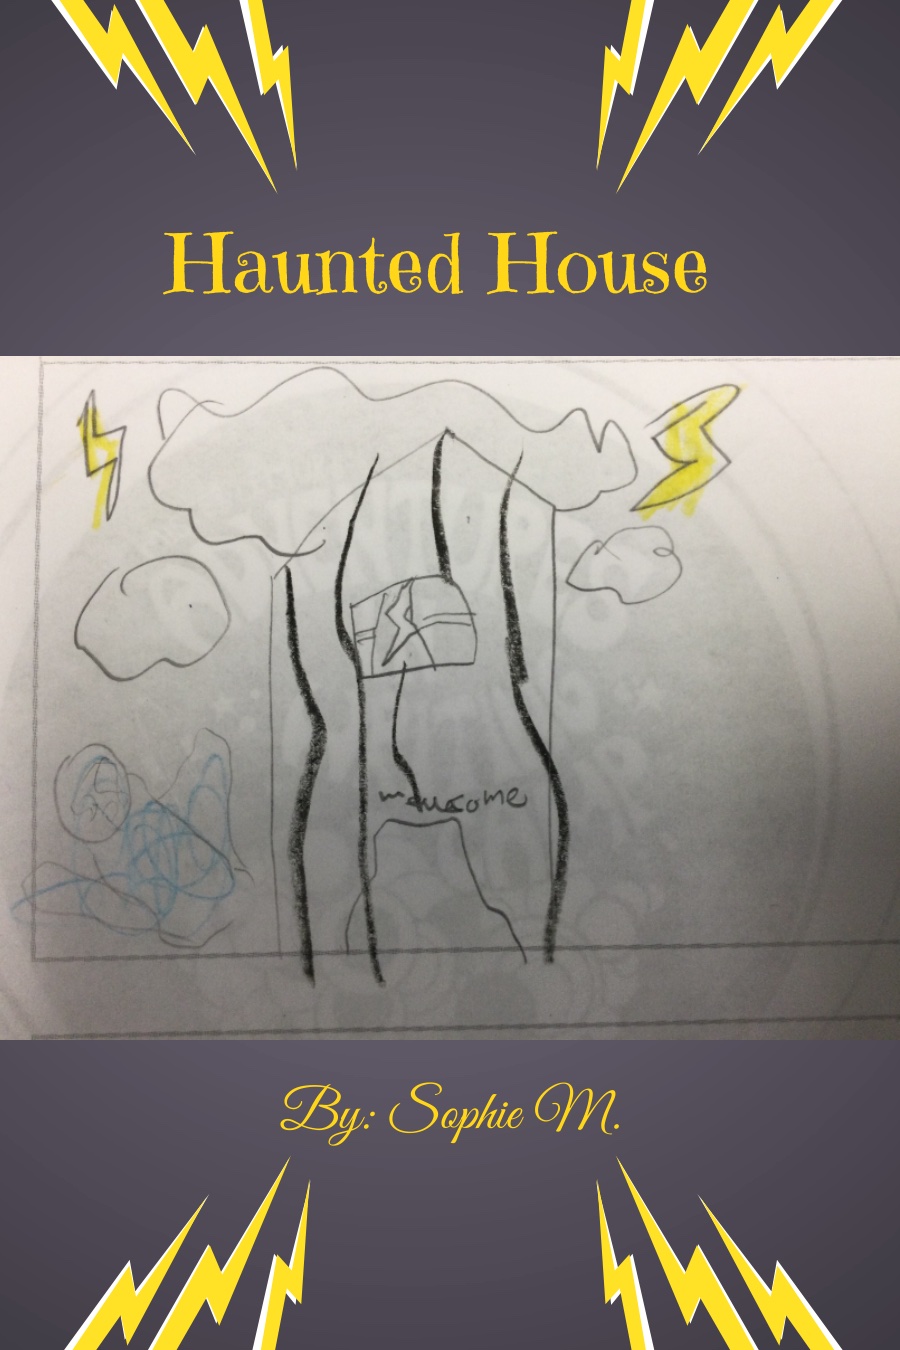 Haunted House by Sophie M